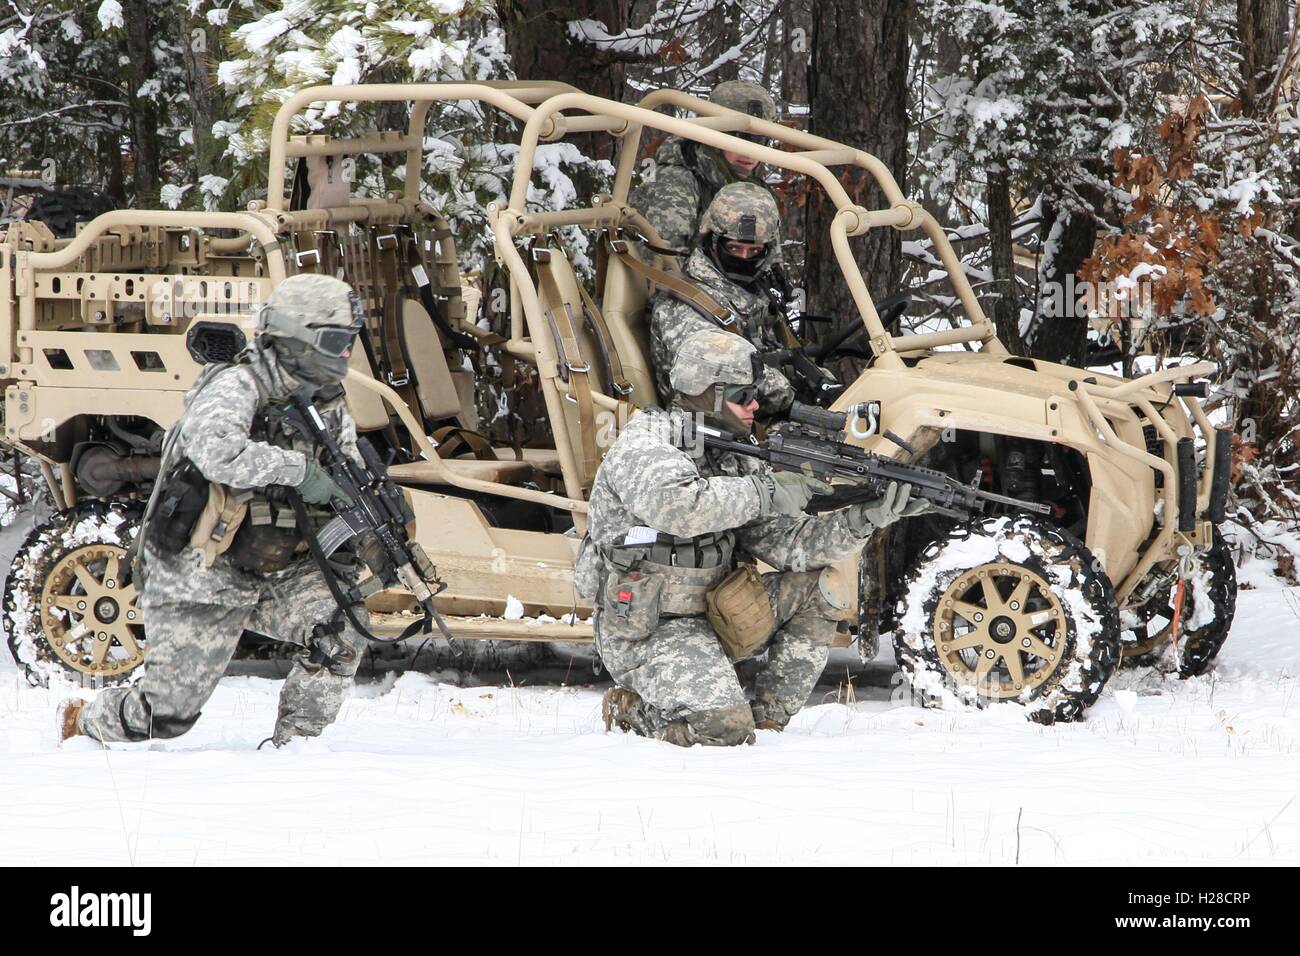 U.S. Army soldiers practice training with the new Light Tactical All Terrain Vehicle at Fort Pickett February 26, 2015 in Blackstone, Virginia. Stock Photo